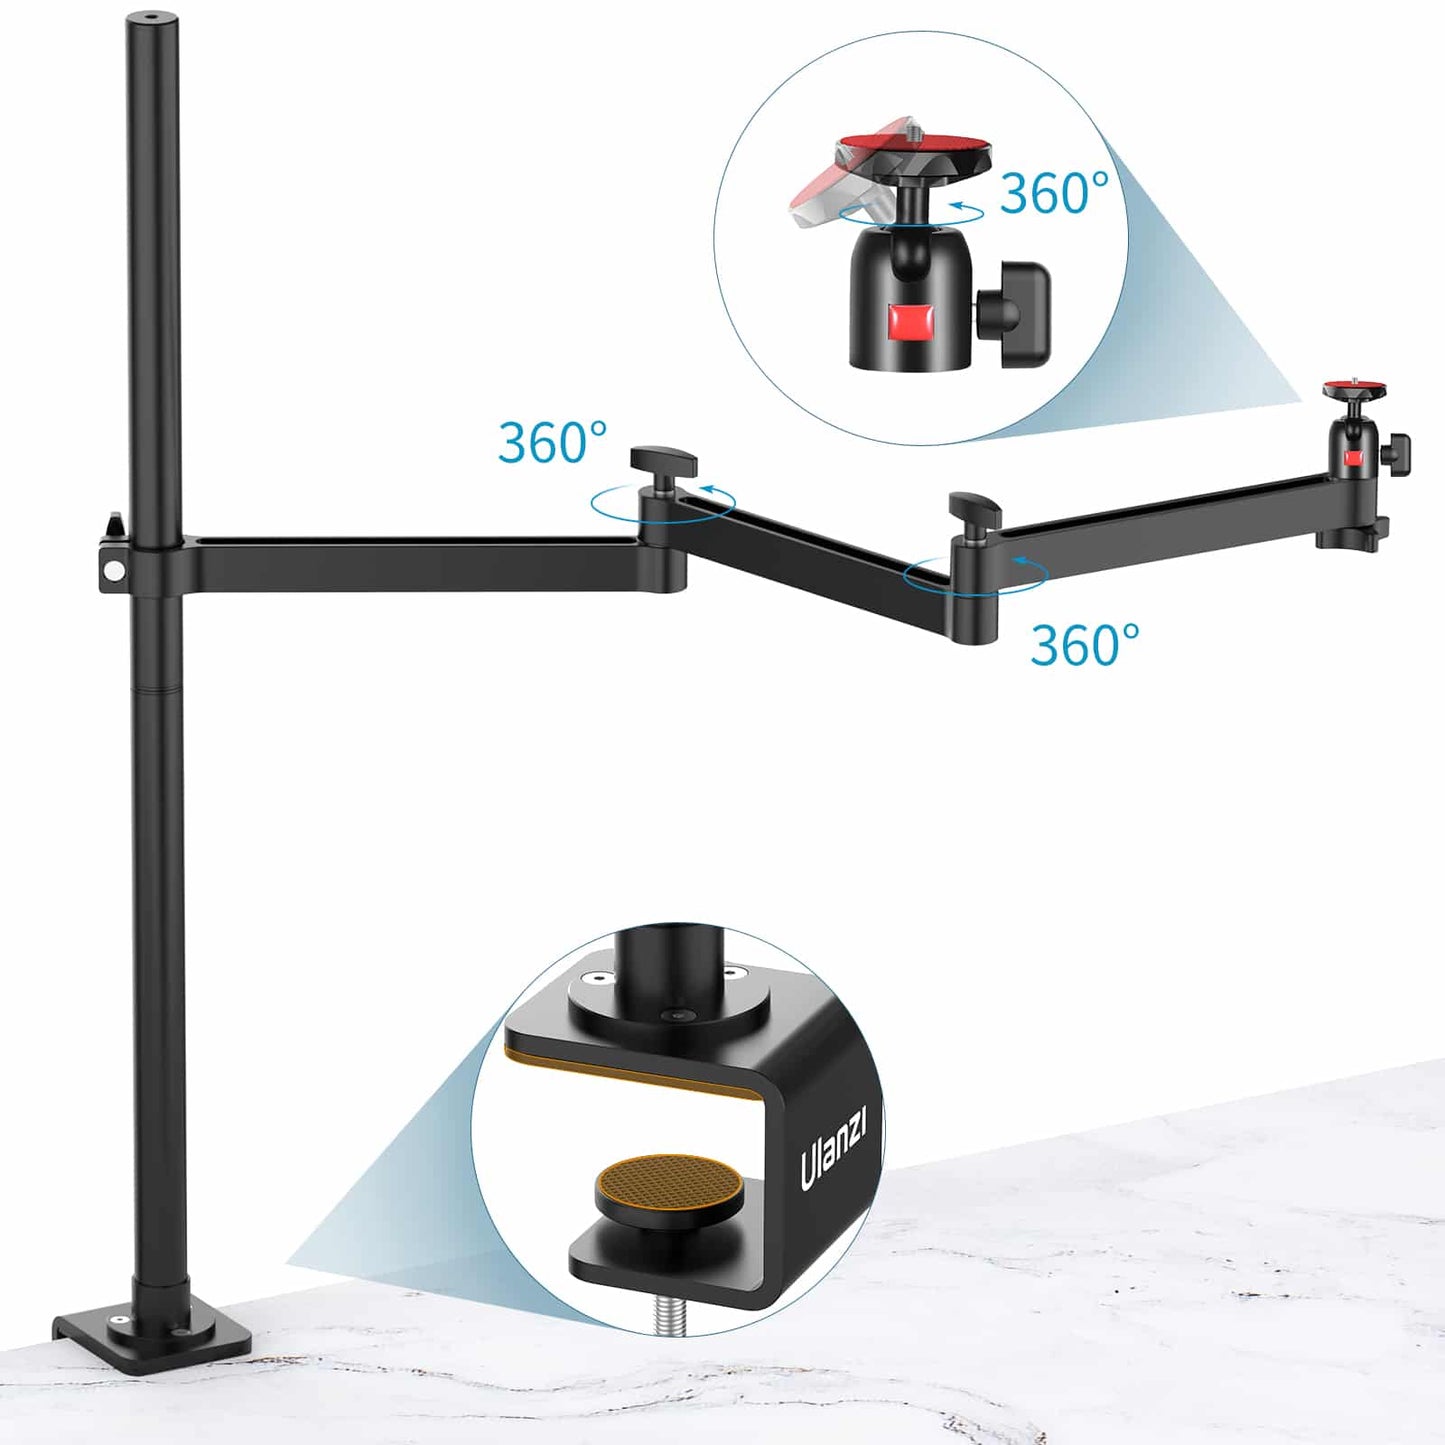 Ulanzi adjustable desk stand with table clamp for camera or video light - 1 arm